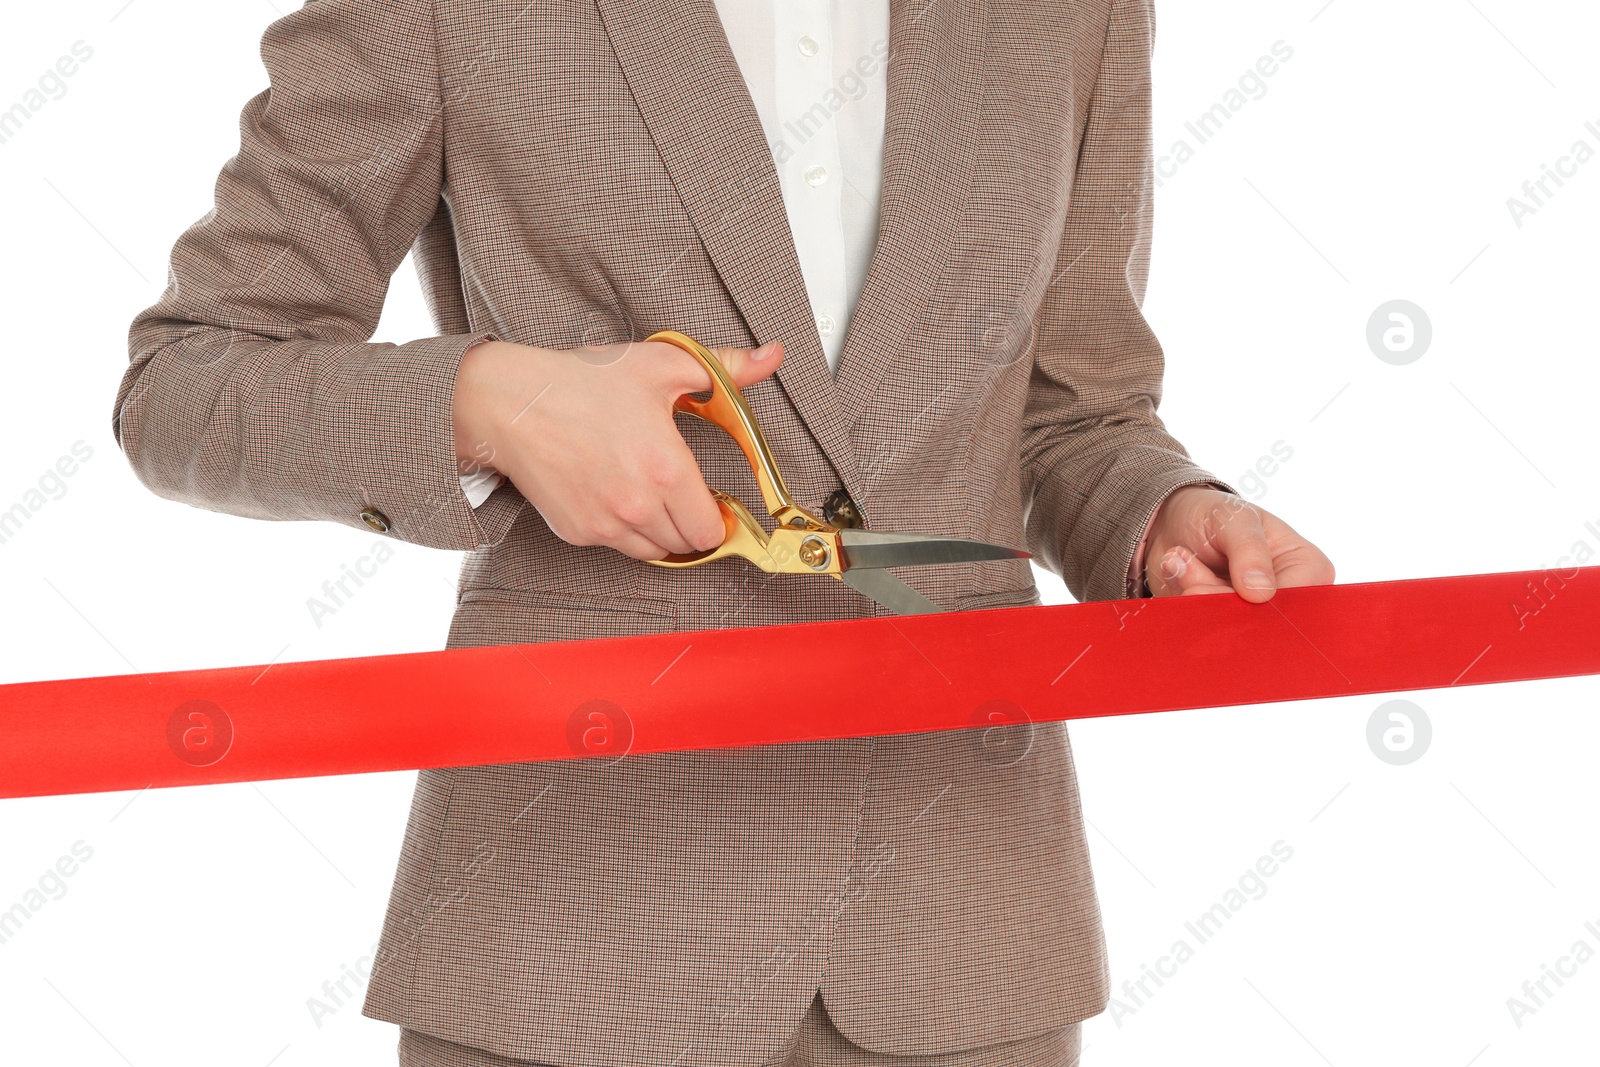 Photo of Woman in office suit cutting red ribbon isolated on white, closeup